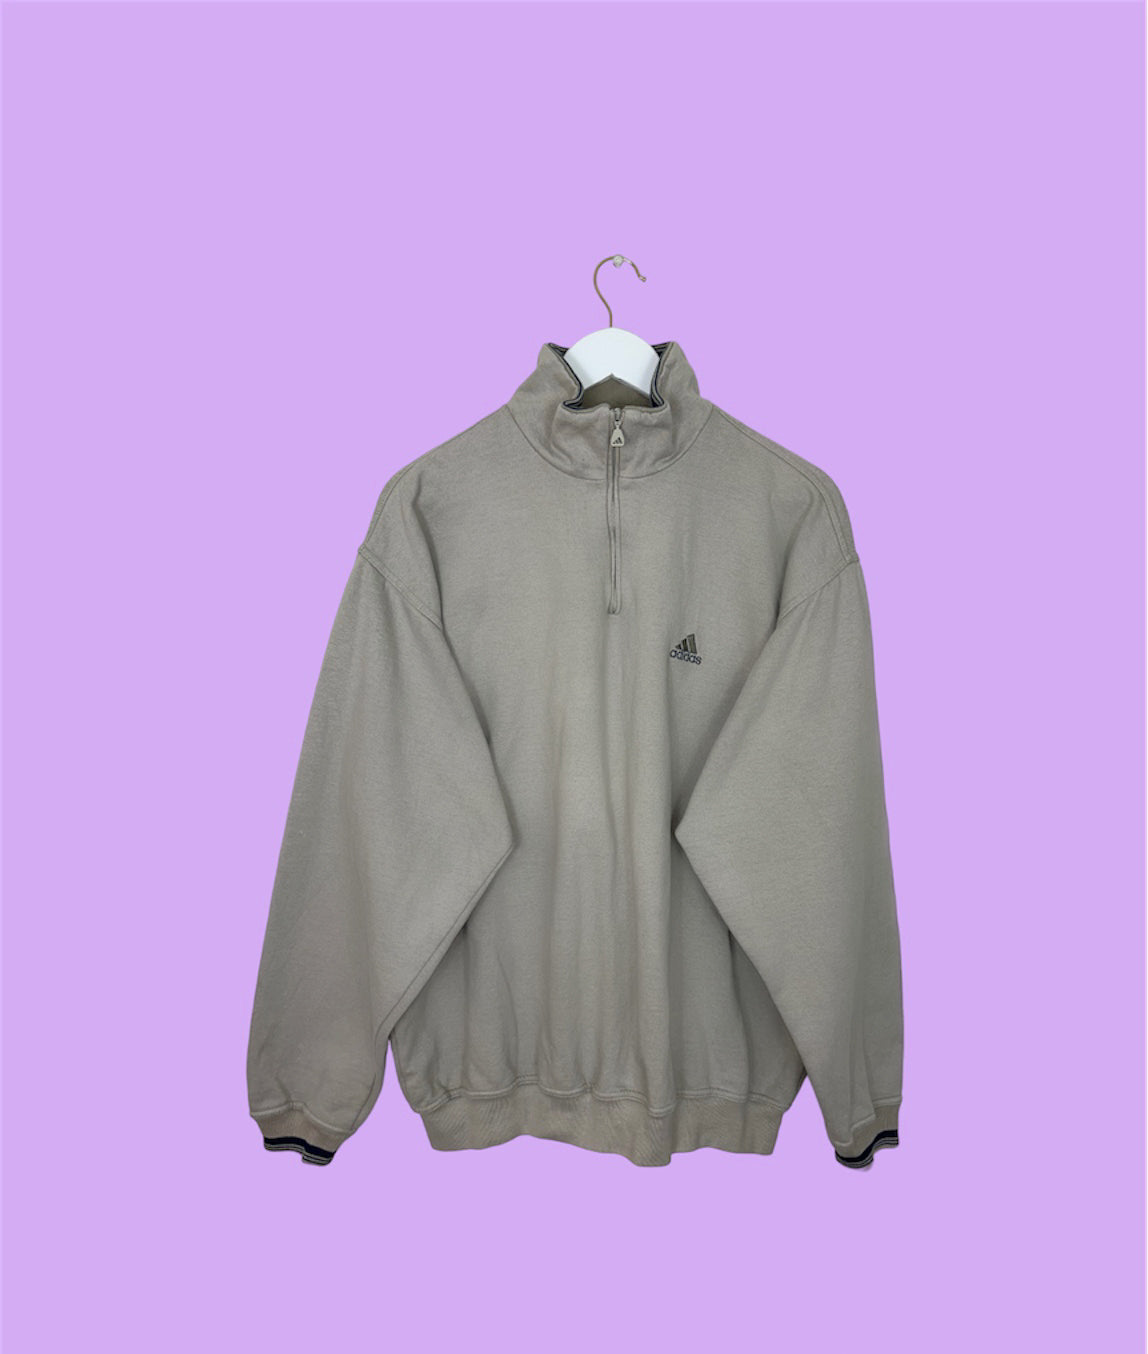 beige 1/4 zip sweatshirt with small adidas logo shown on a lilac background